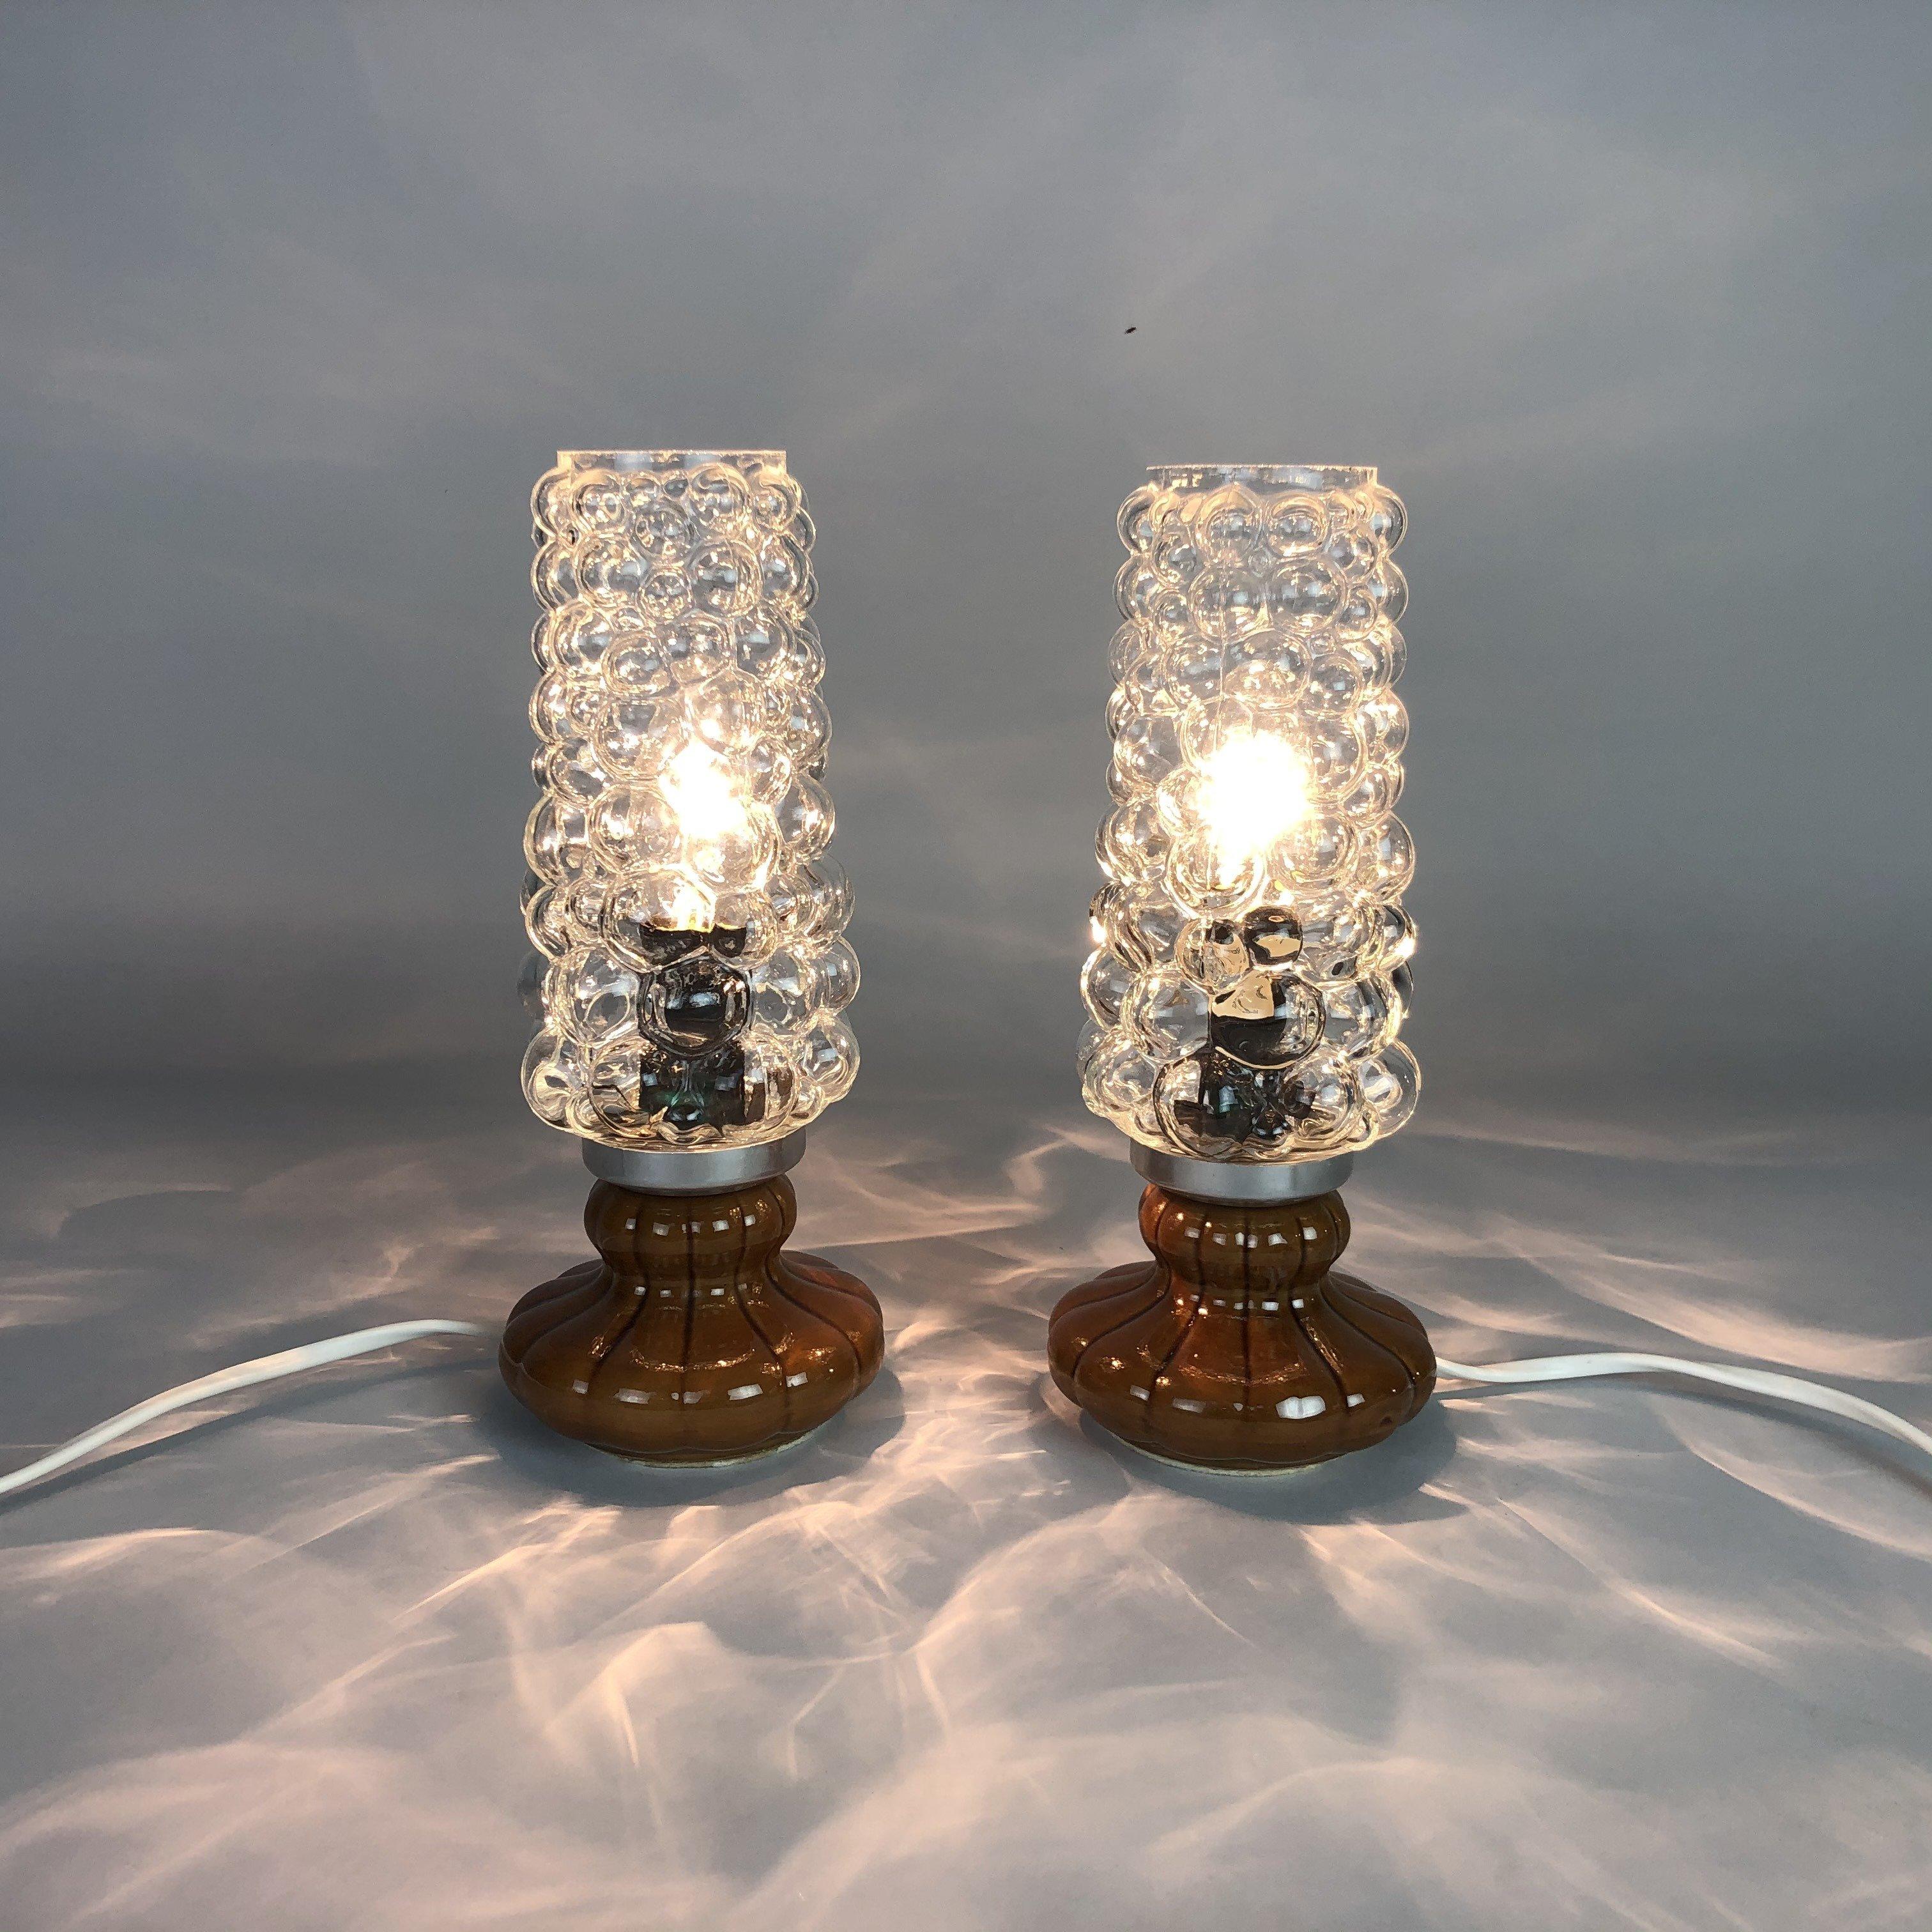 Pair of table or bedside lamps in Helena Tynell style. Ceramic base and bubble glass lamp shades.